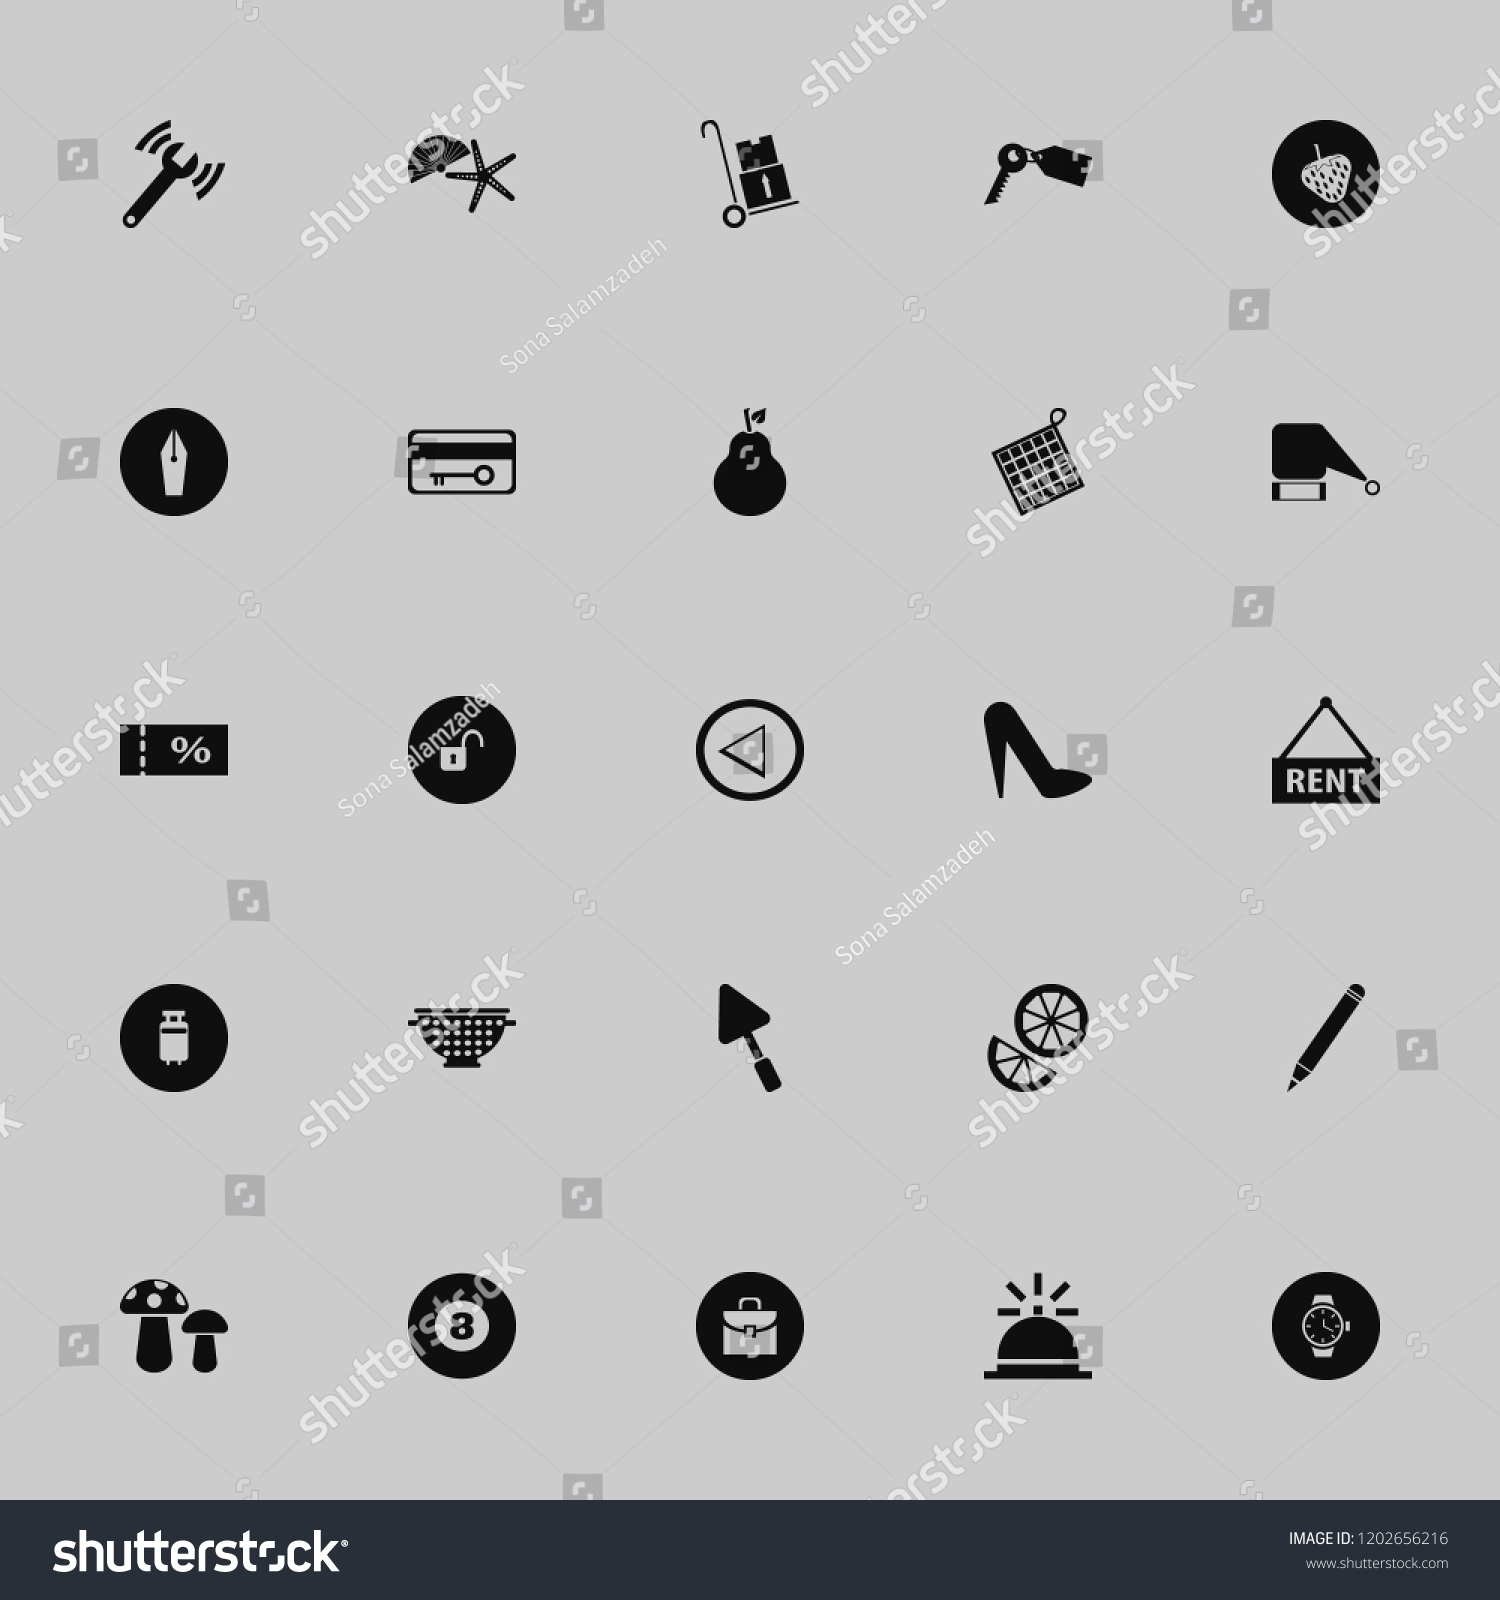 object icon. object vector icons set strawberry, watch, briefcase and fountain pen #1202656216